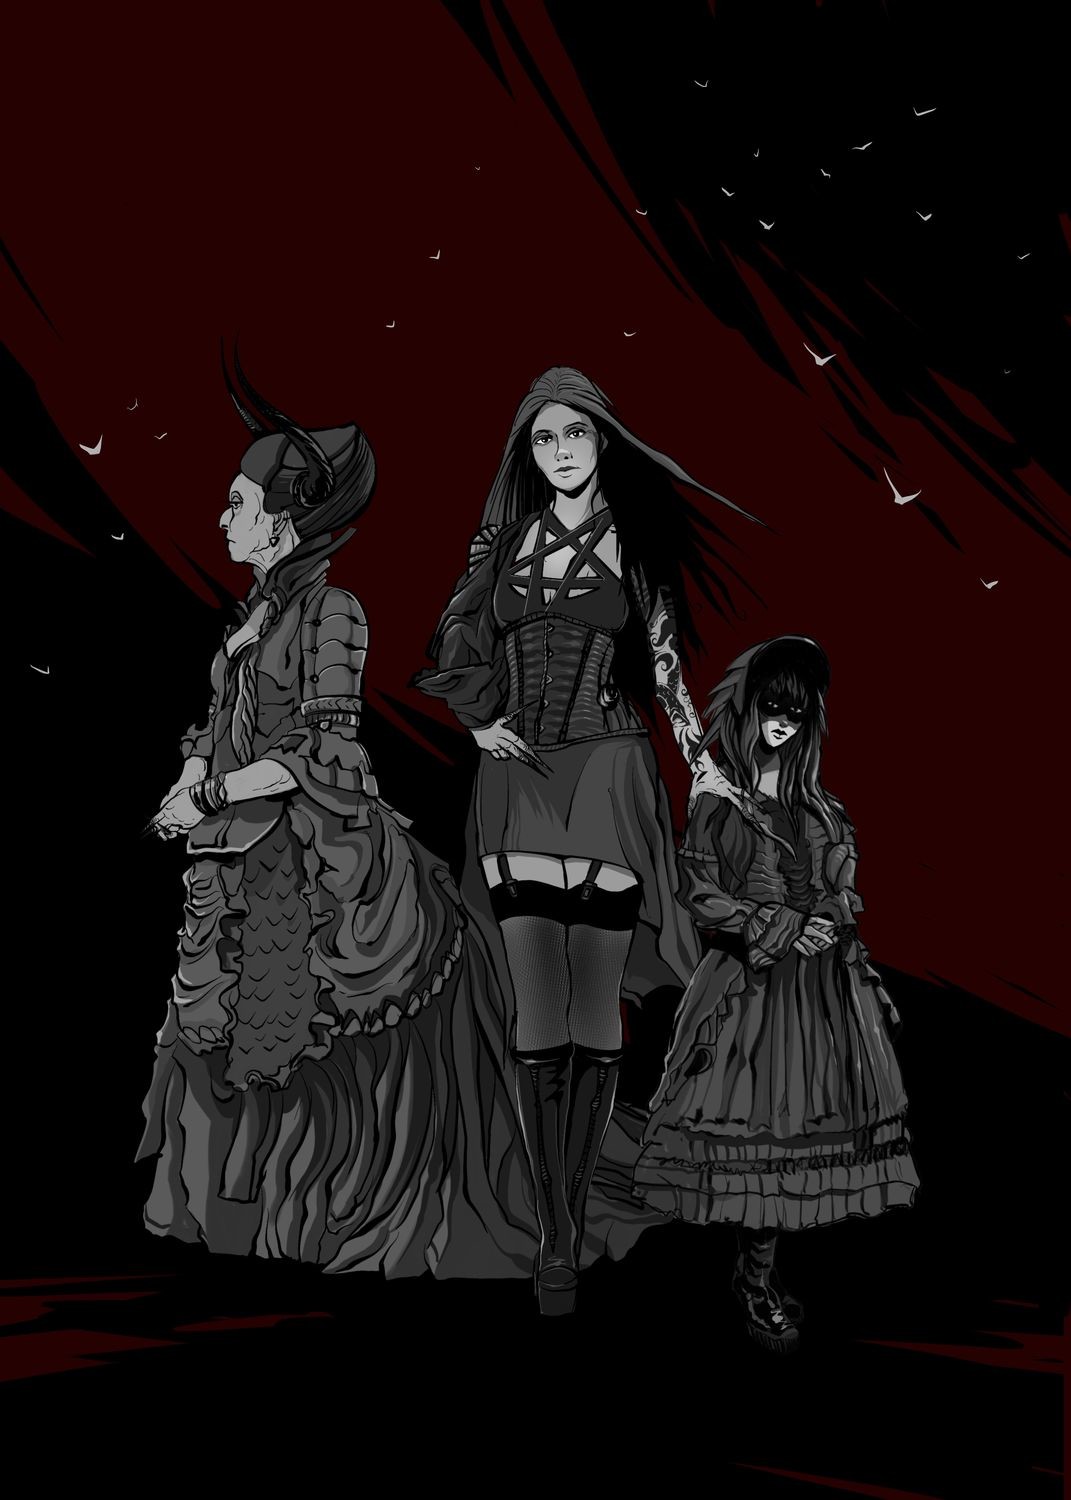 Daughters of the night